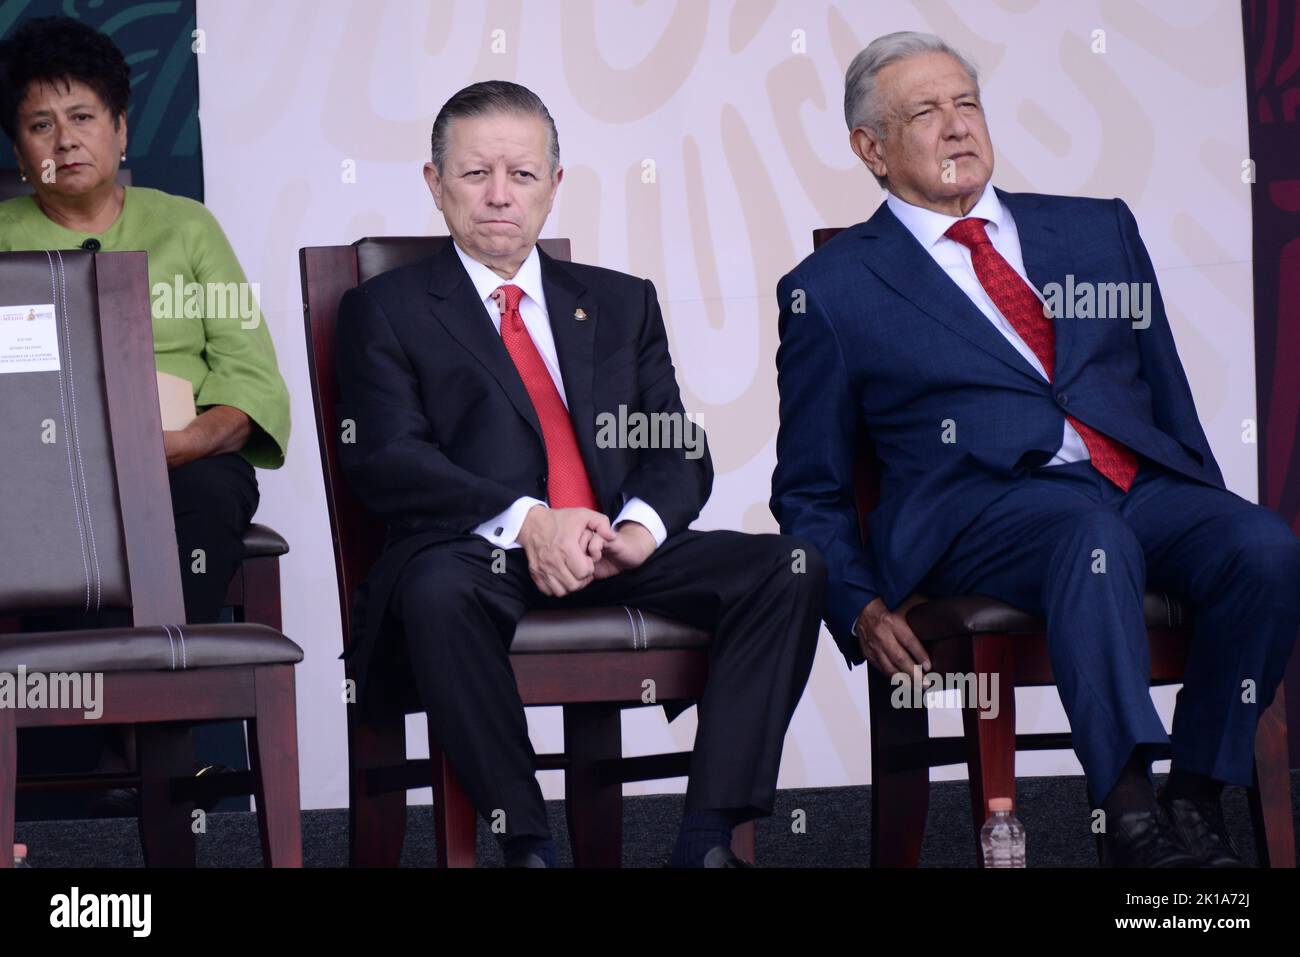 Mexico City, Mexico. 16th Sep, 2022. September 16, 2022, Mexico City, Mexico: Mexico’s President Andres Manuel Lopez Obrador accompanied by  and president of the Supreme Court of Justice Arturo Zaldivar during  the ceremony of the civic-military parade as part of the commemoration of the 212th Anniversary of the beginning of Mexico's Independence in the downtown. on September 16, 2022 in Mexico City, Mexico. (Photo by Carlos Tischler/ Eyepix Group) Credit: Eyepix Group/Alamy Live News Stock Photo